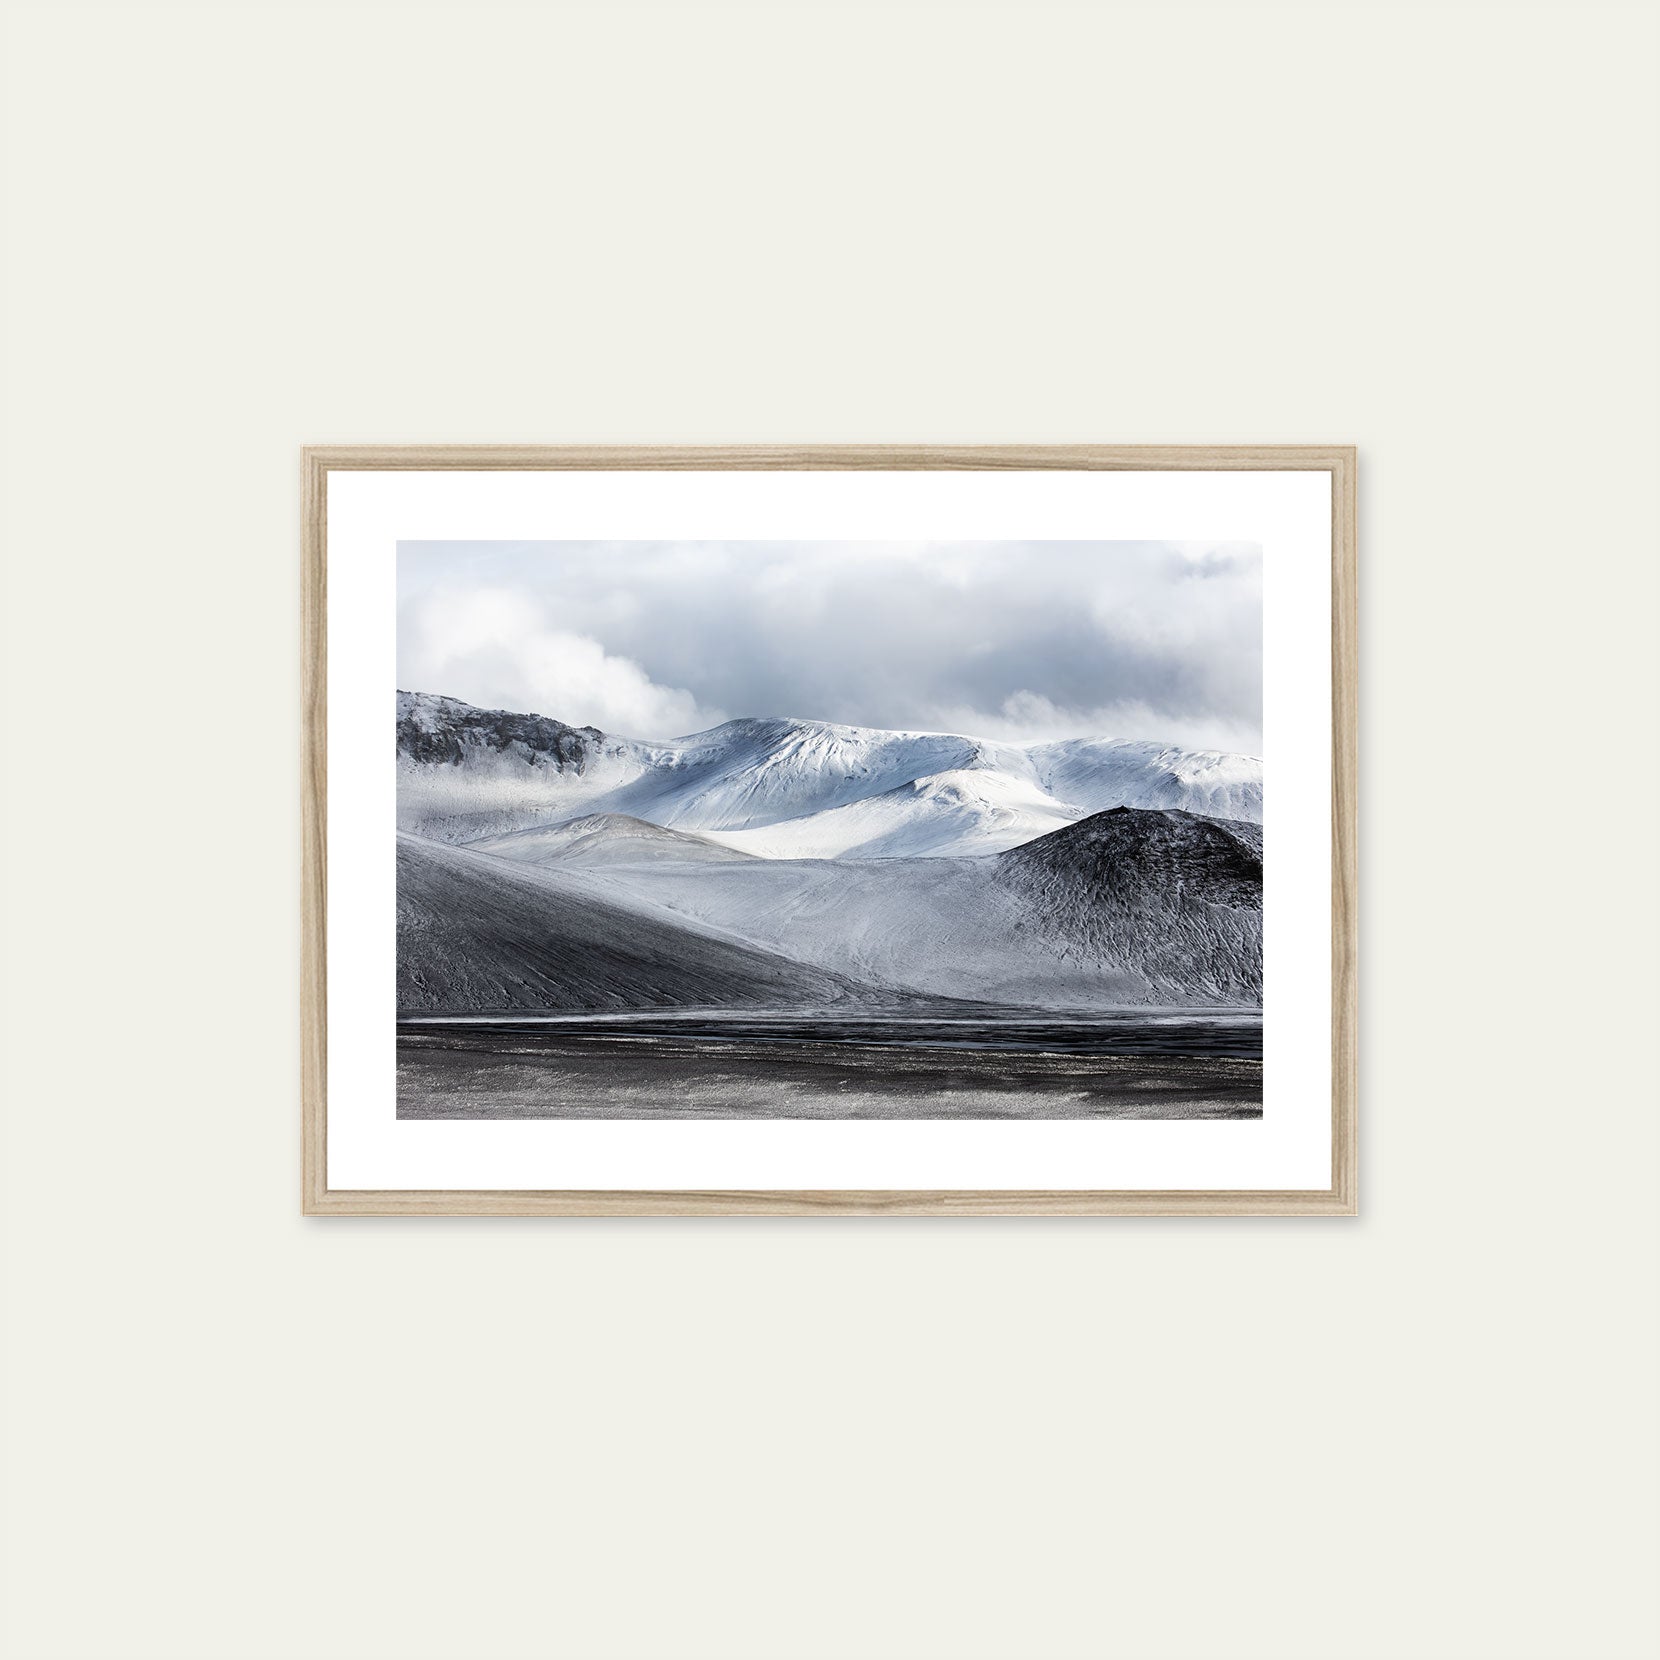 A wood framed print of a snowy mountain range in Iceland